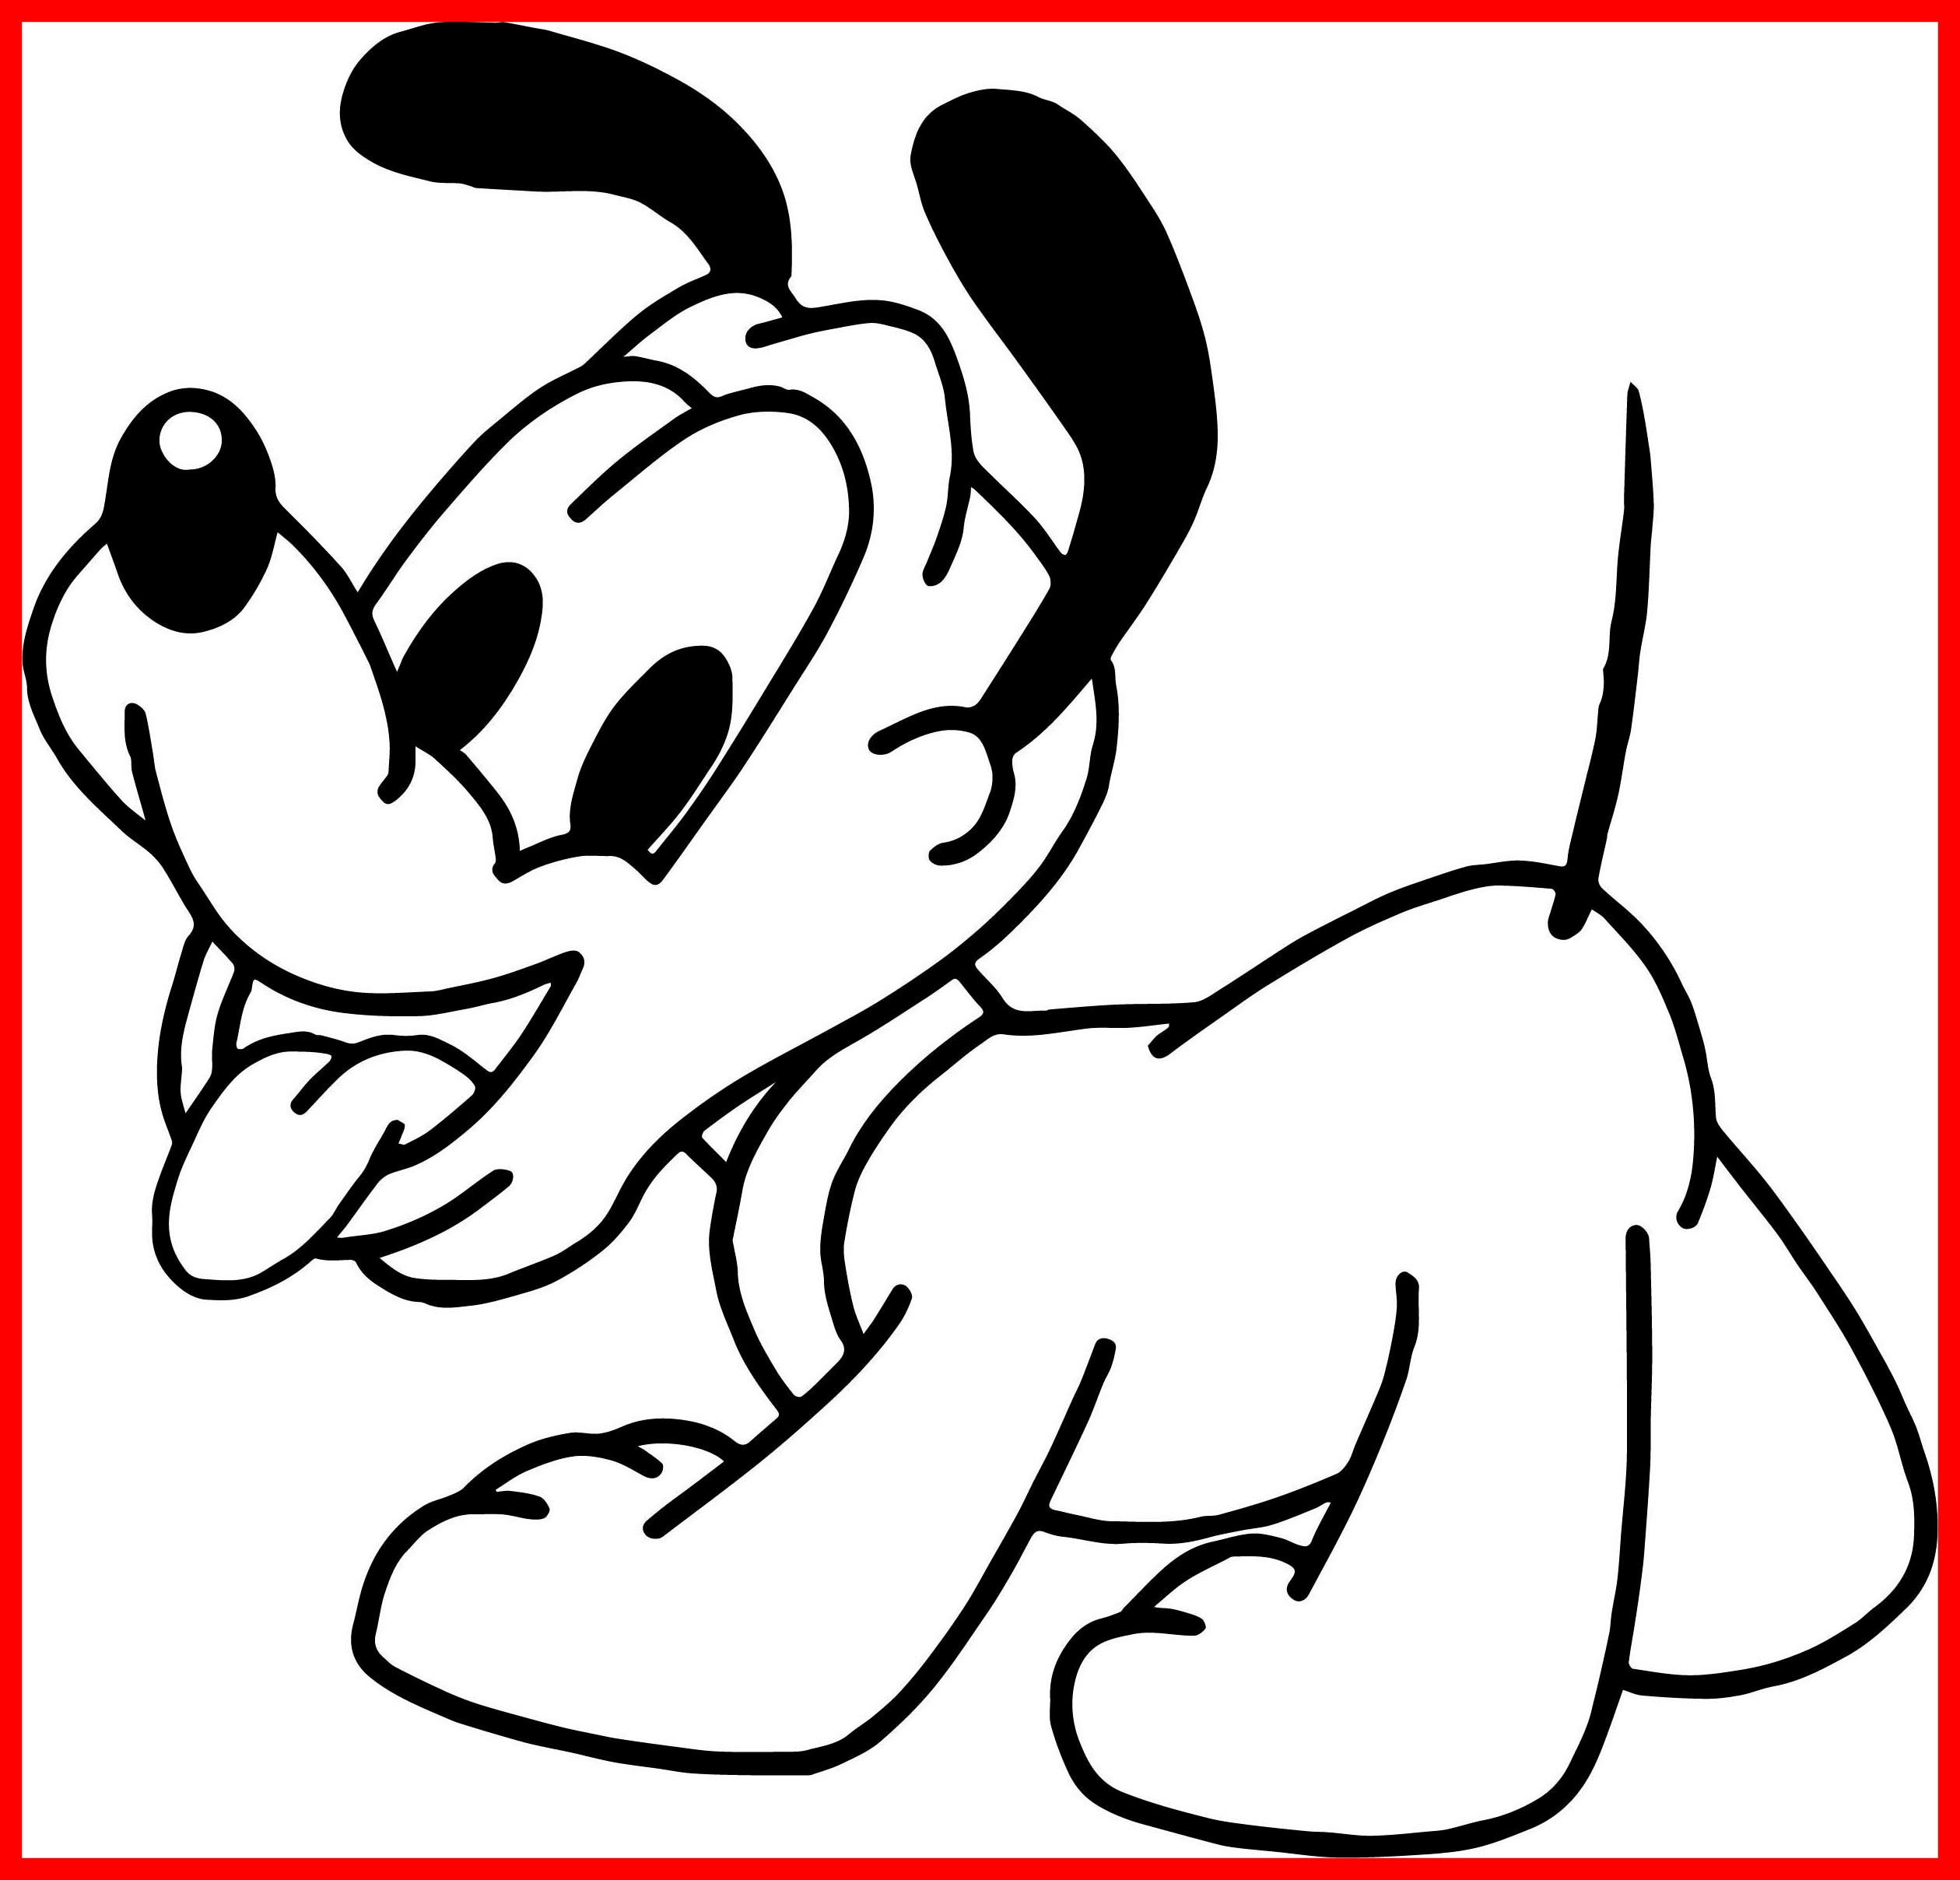 Pluto Coloring Pages Pluto Coloring Pages Pluto Coloring Page With Ba Pages At